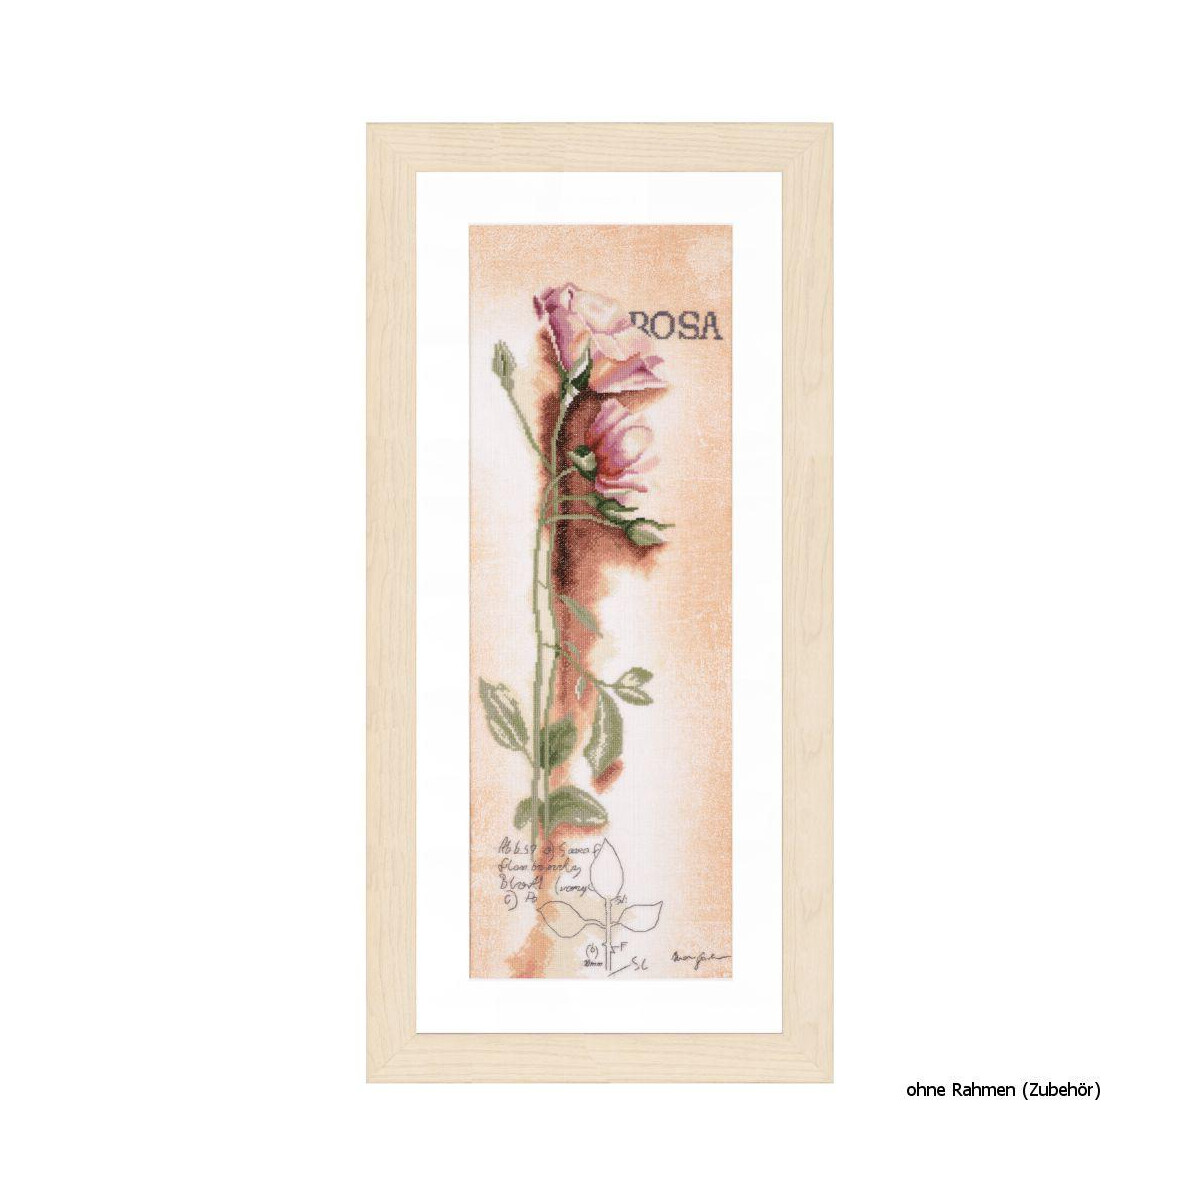 The framed vertical artwork shows a pink rose with buds...